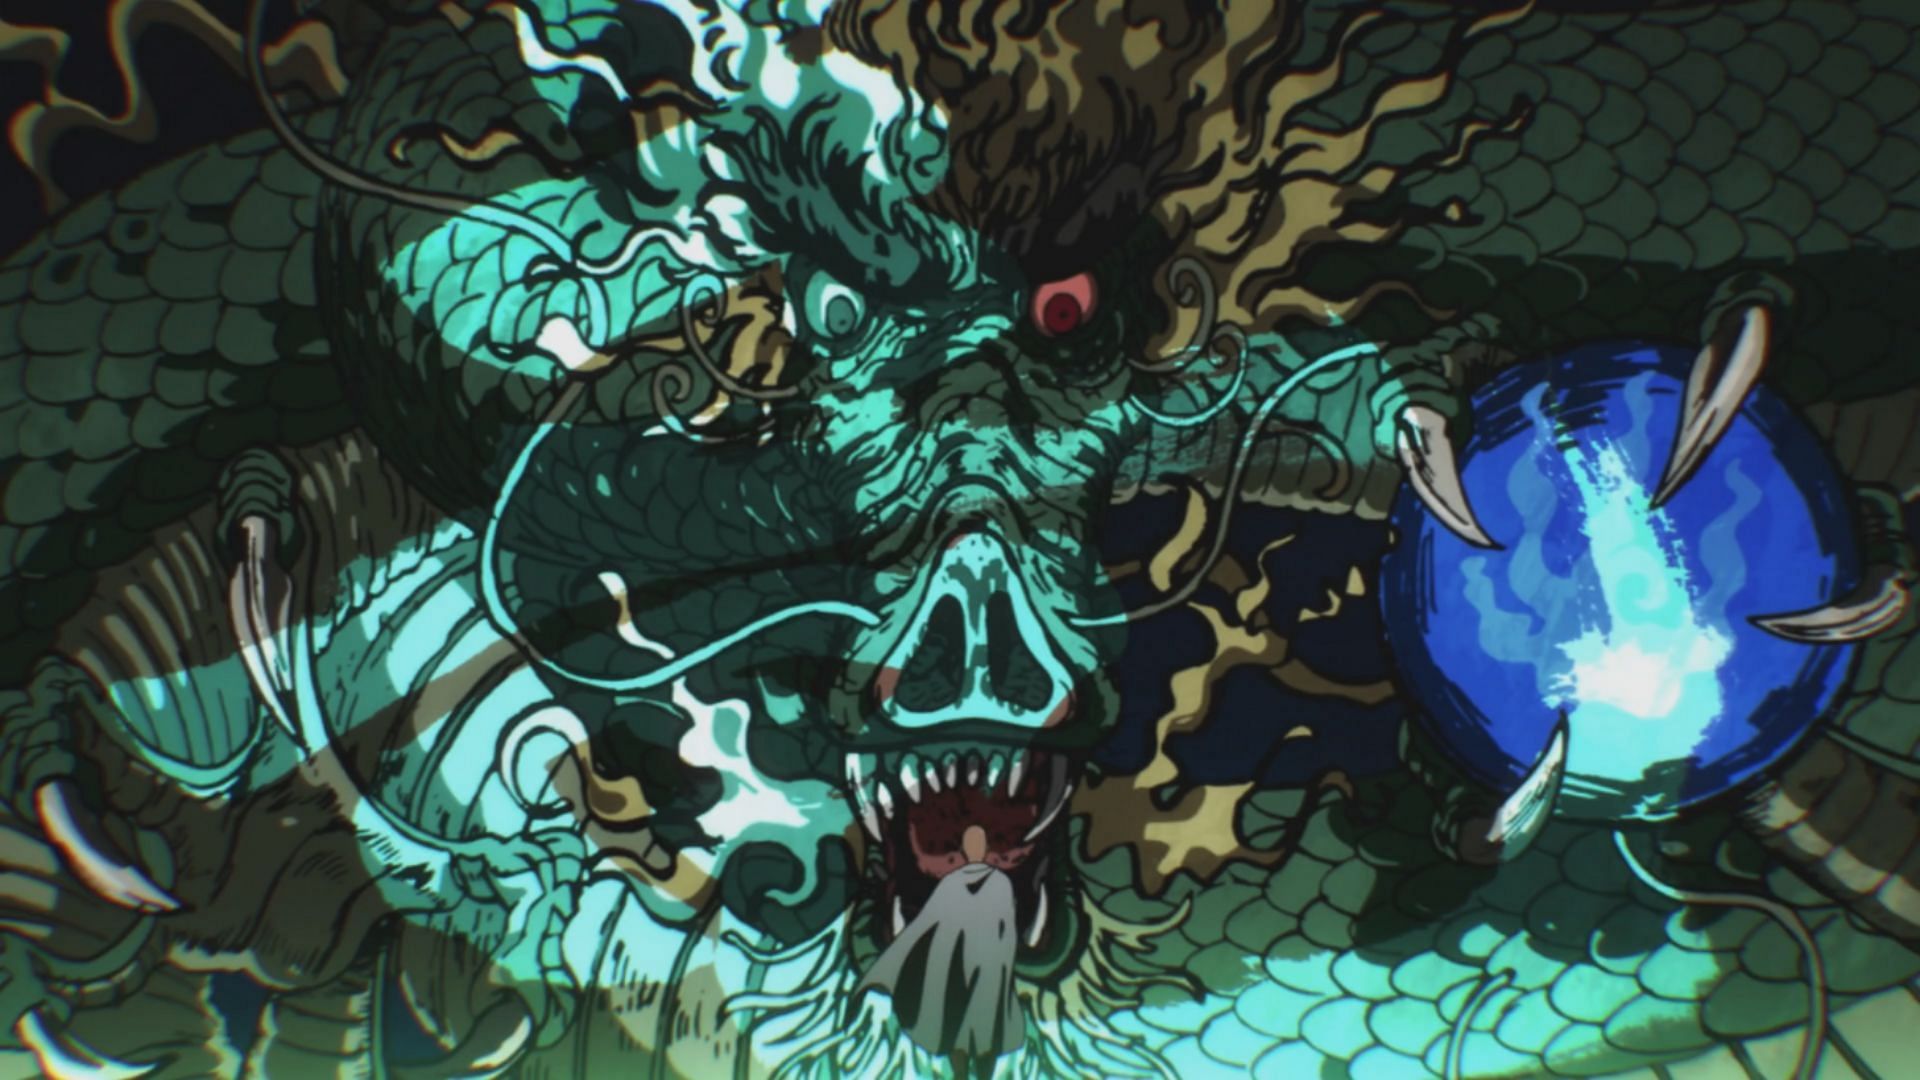 Dragon-level Disaster Threat as depicted in One Punch Man (Image via Madhouse)